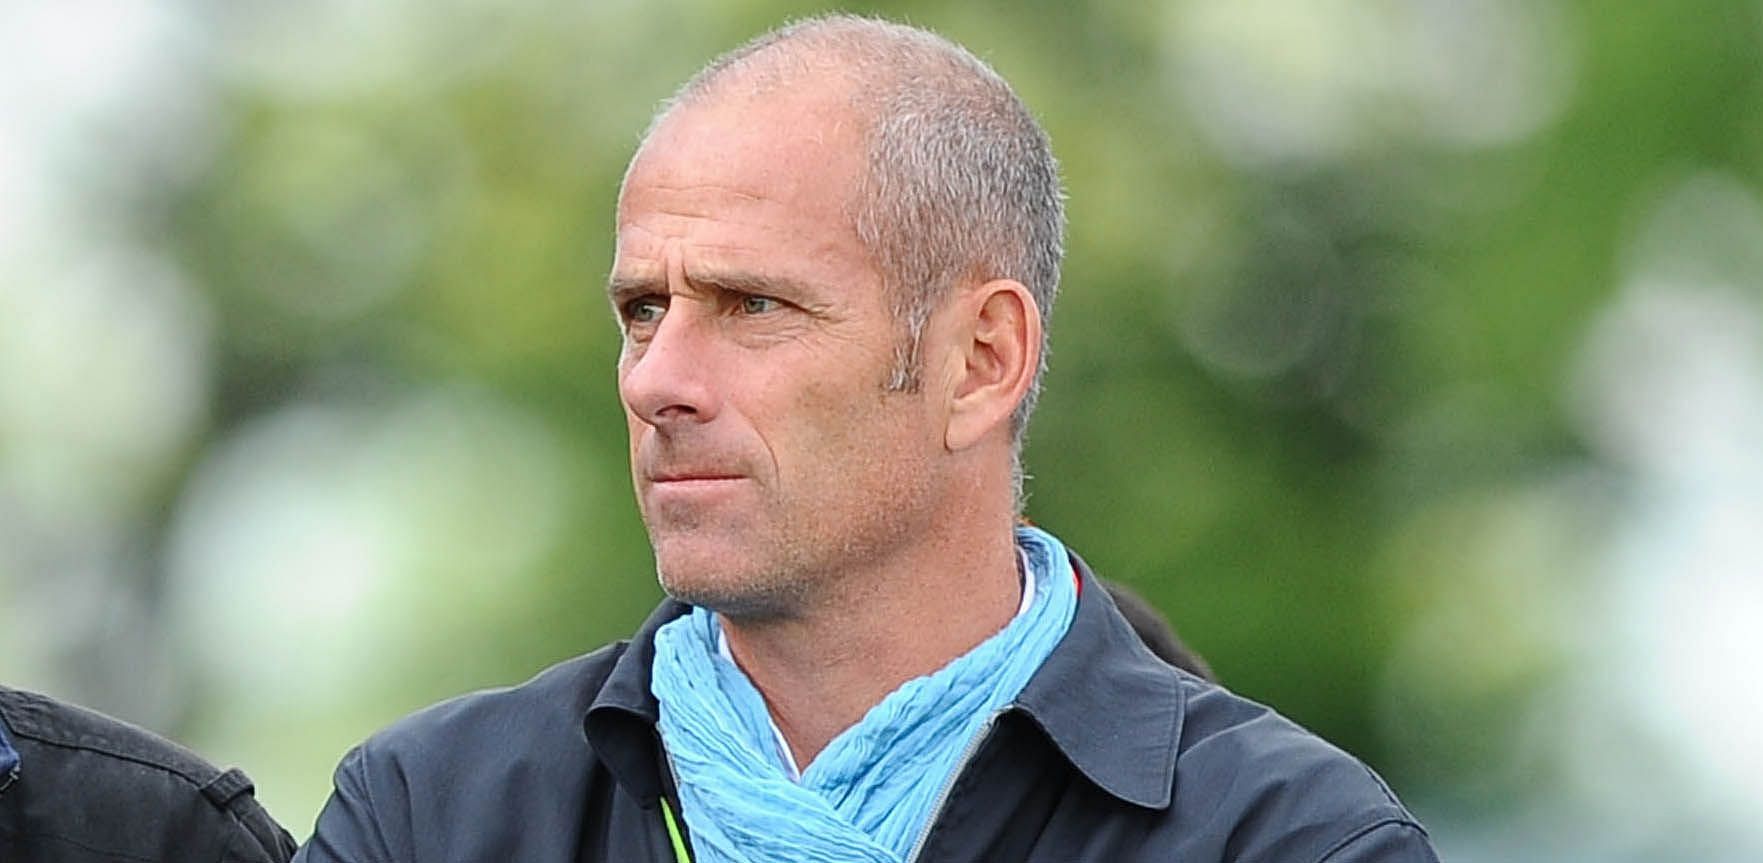 Guy Forget helped France win the Davis Cup in 1991 and 1996